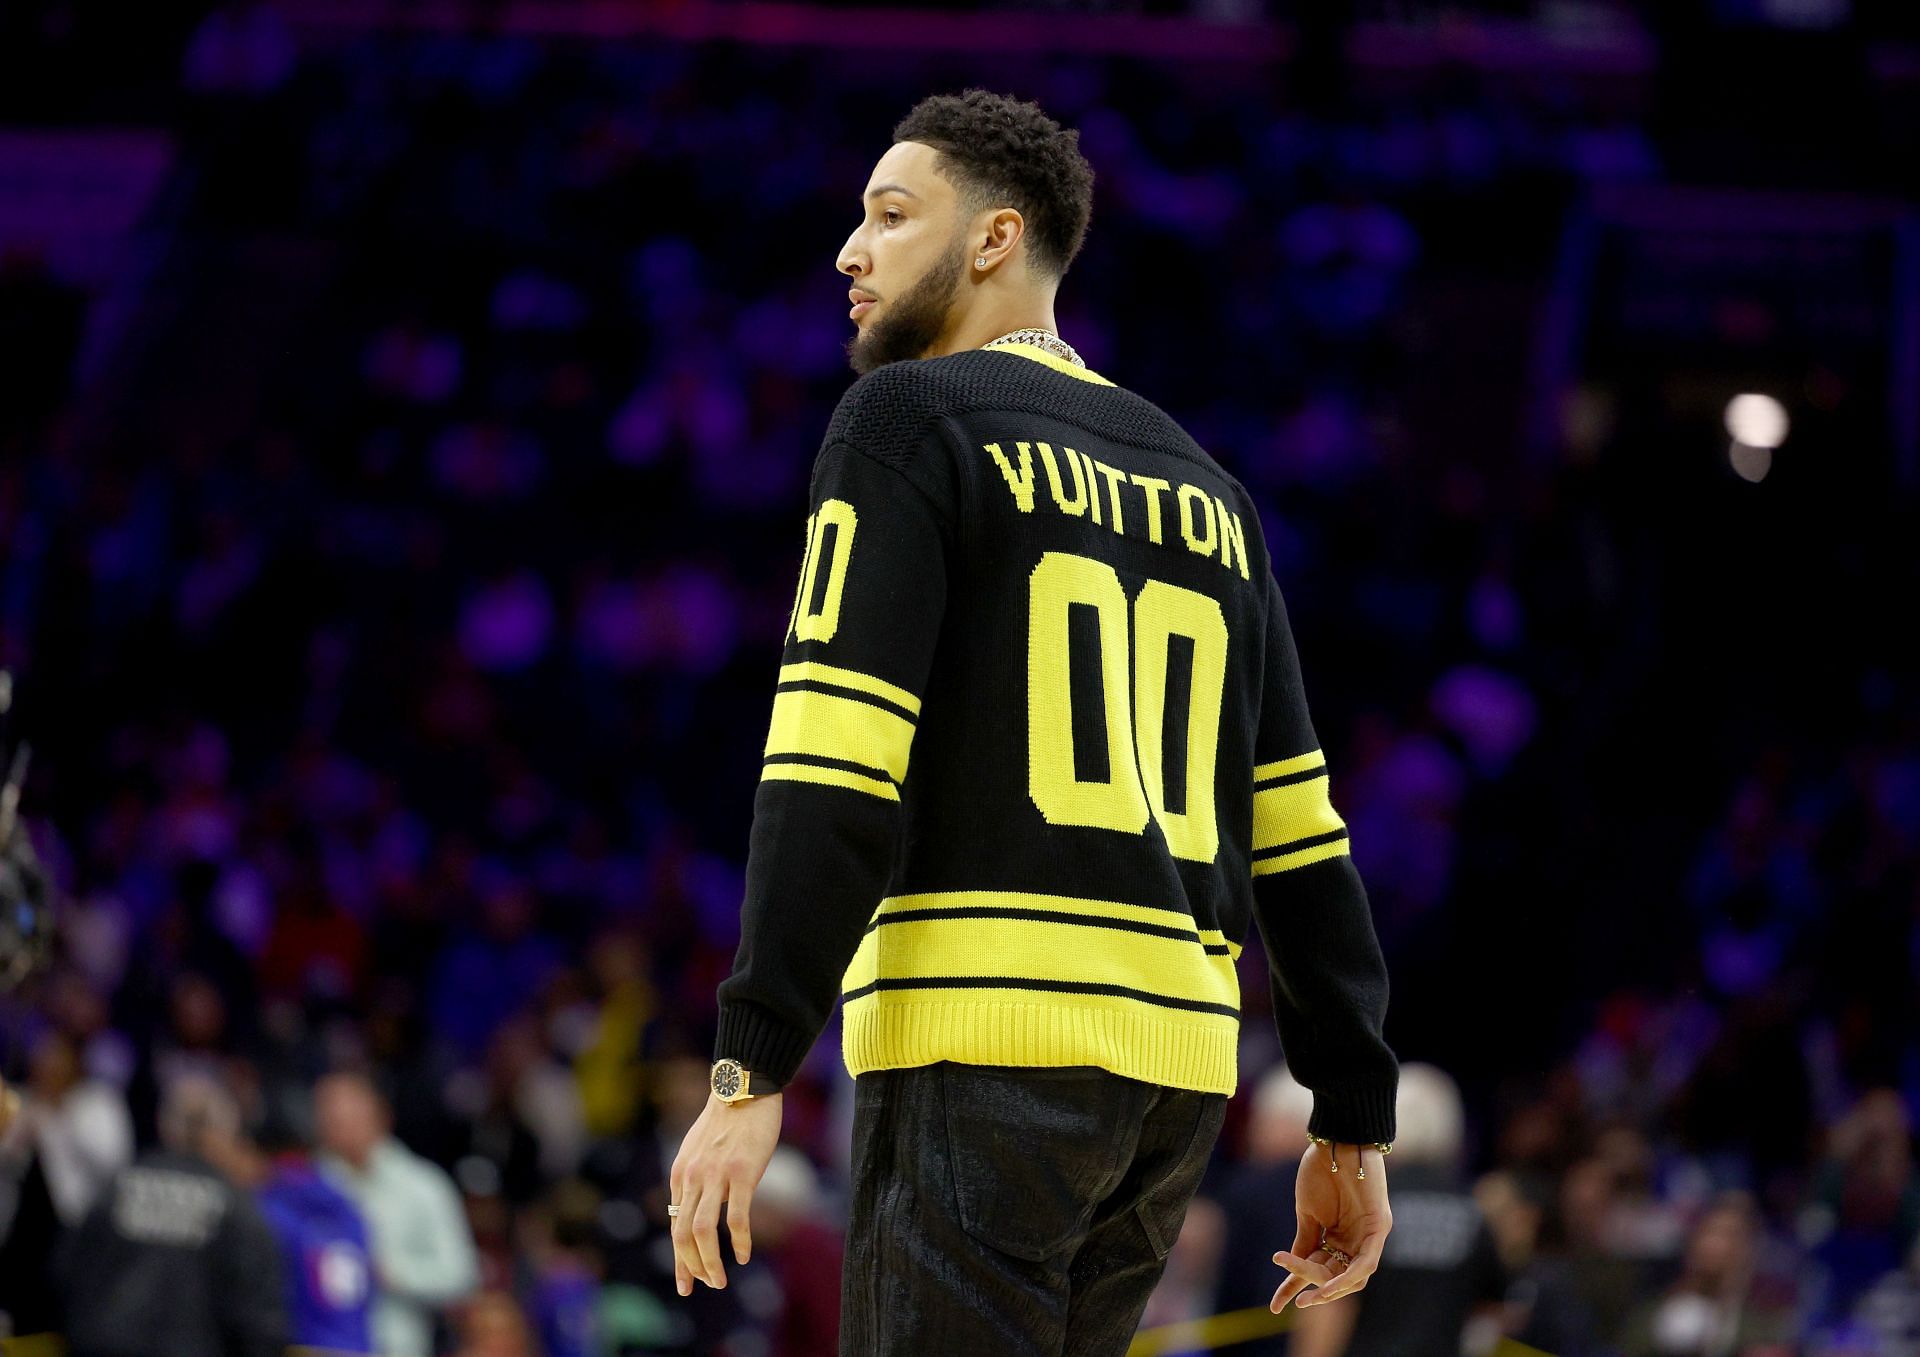 Ben Simmons #10 of the Brooklyn Nets walks on the court at halftime against the Philadelphia 76ers at Wells Fargo Center on March 10, 2022 in Philadelphia, Pennsylvania. The Brooklyn Nets defeated the Philadelphia 76ers 129-100.